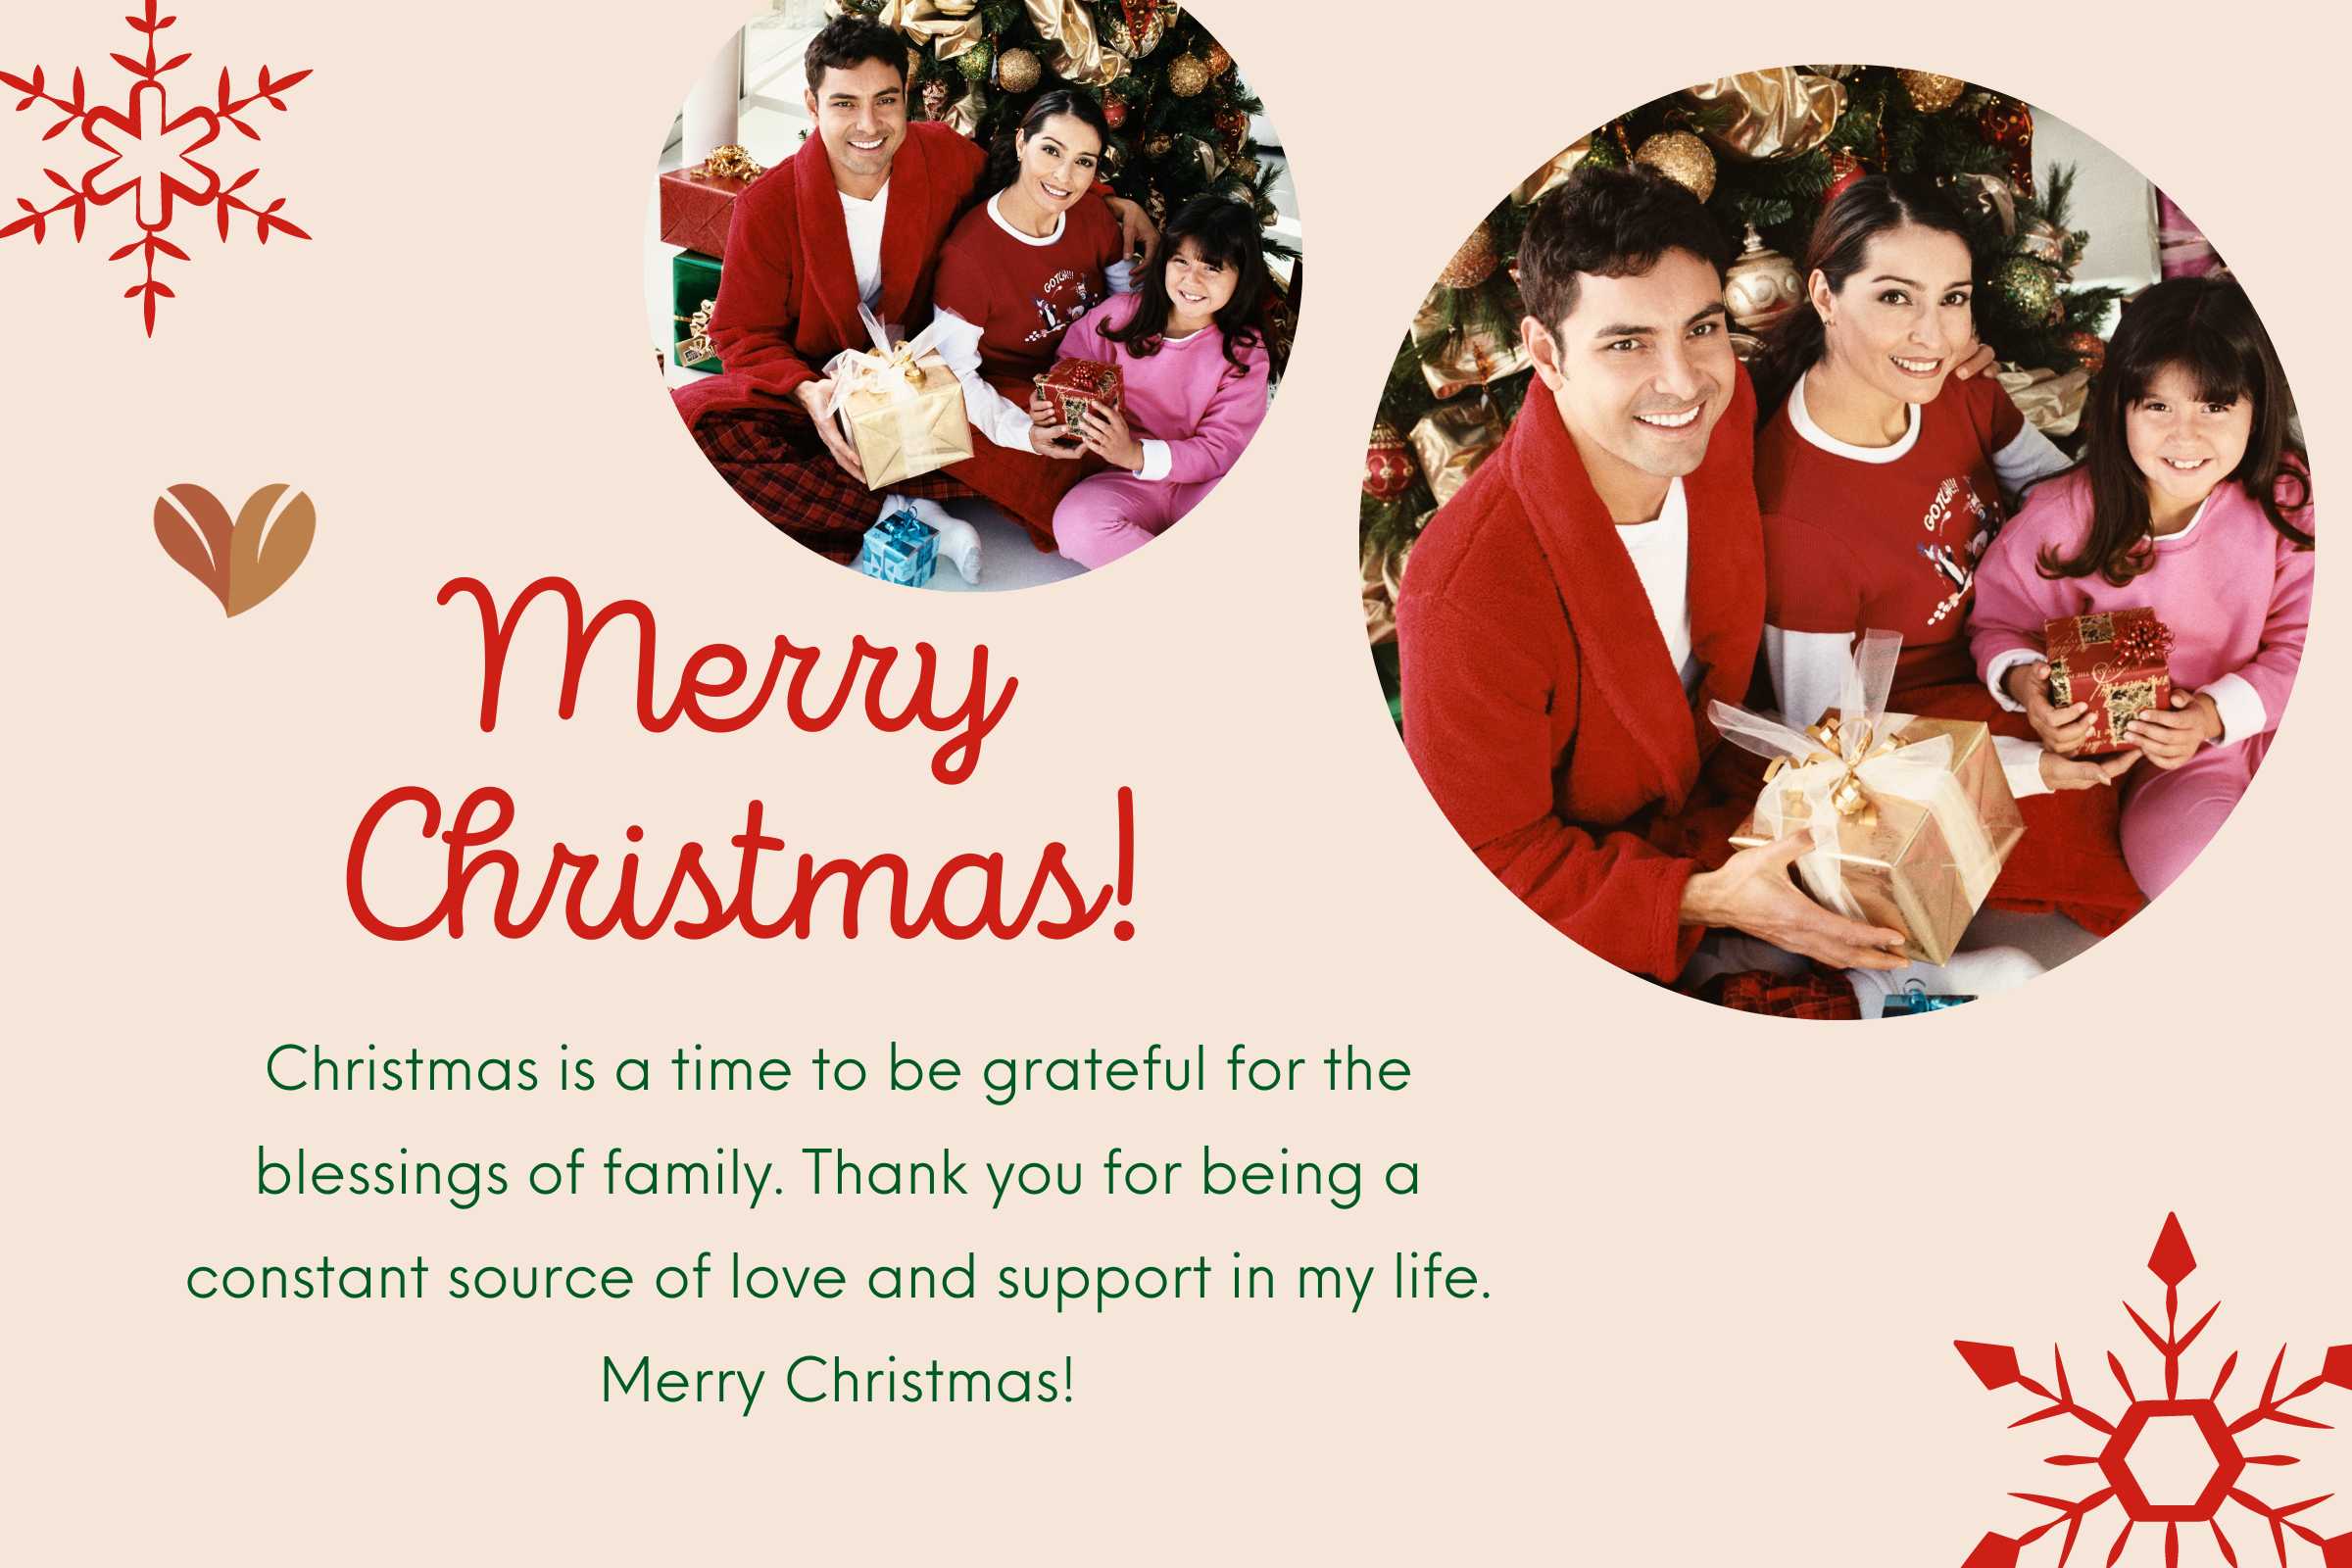 Be grateful for the blessings with Merry Christmas wishes for family